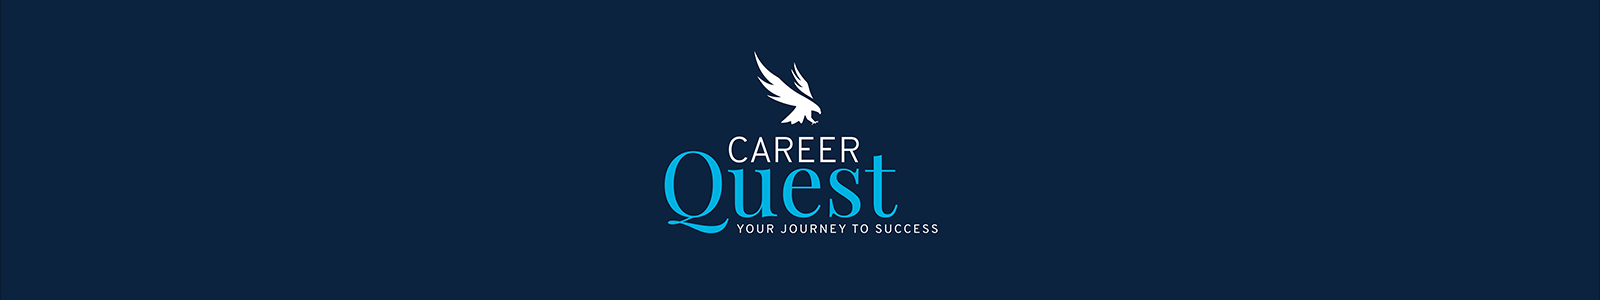 UNF Career Quest: Your Journey to Success